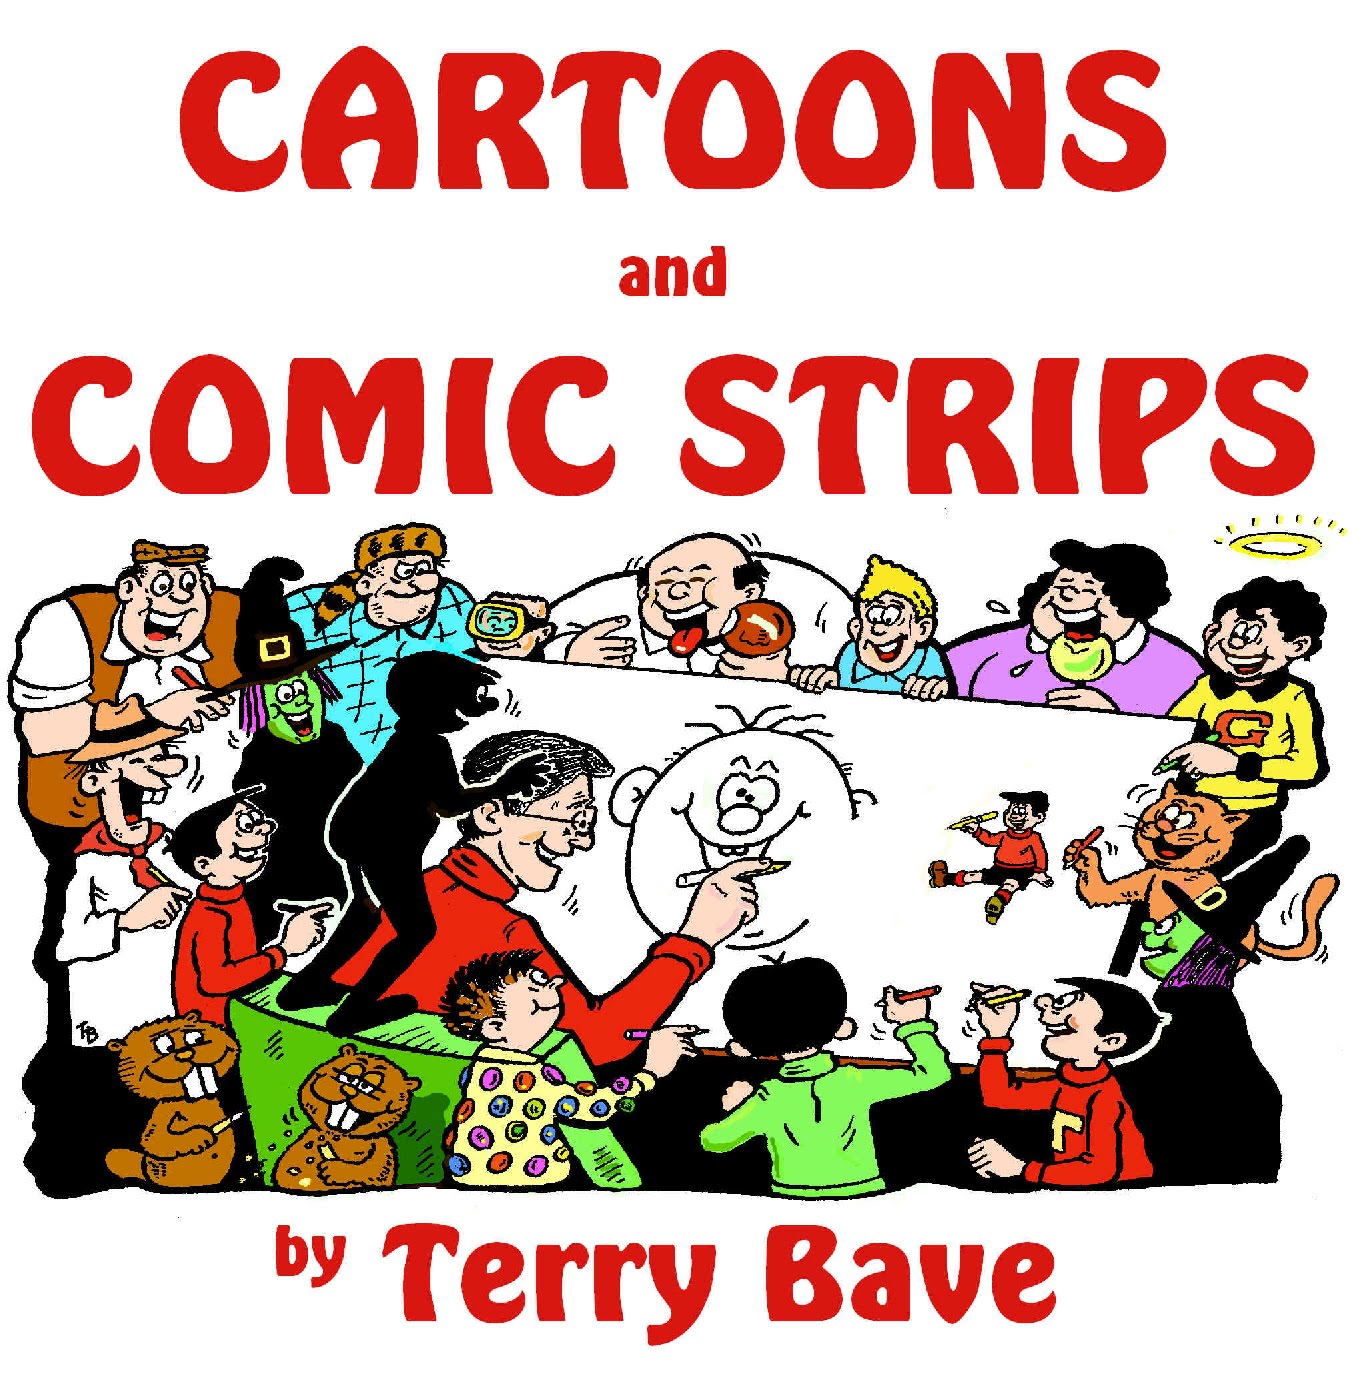 Cartoons and Comic Strips by Terry Bave